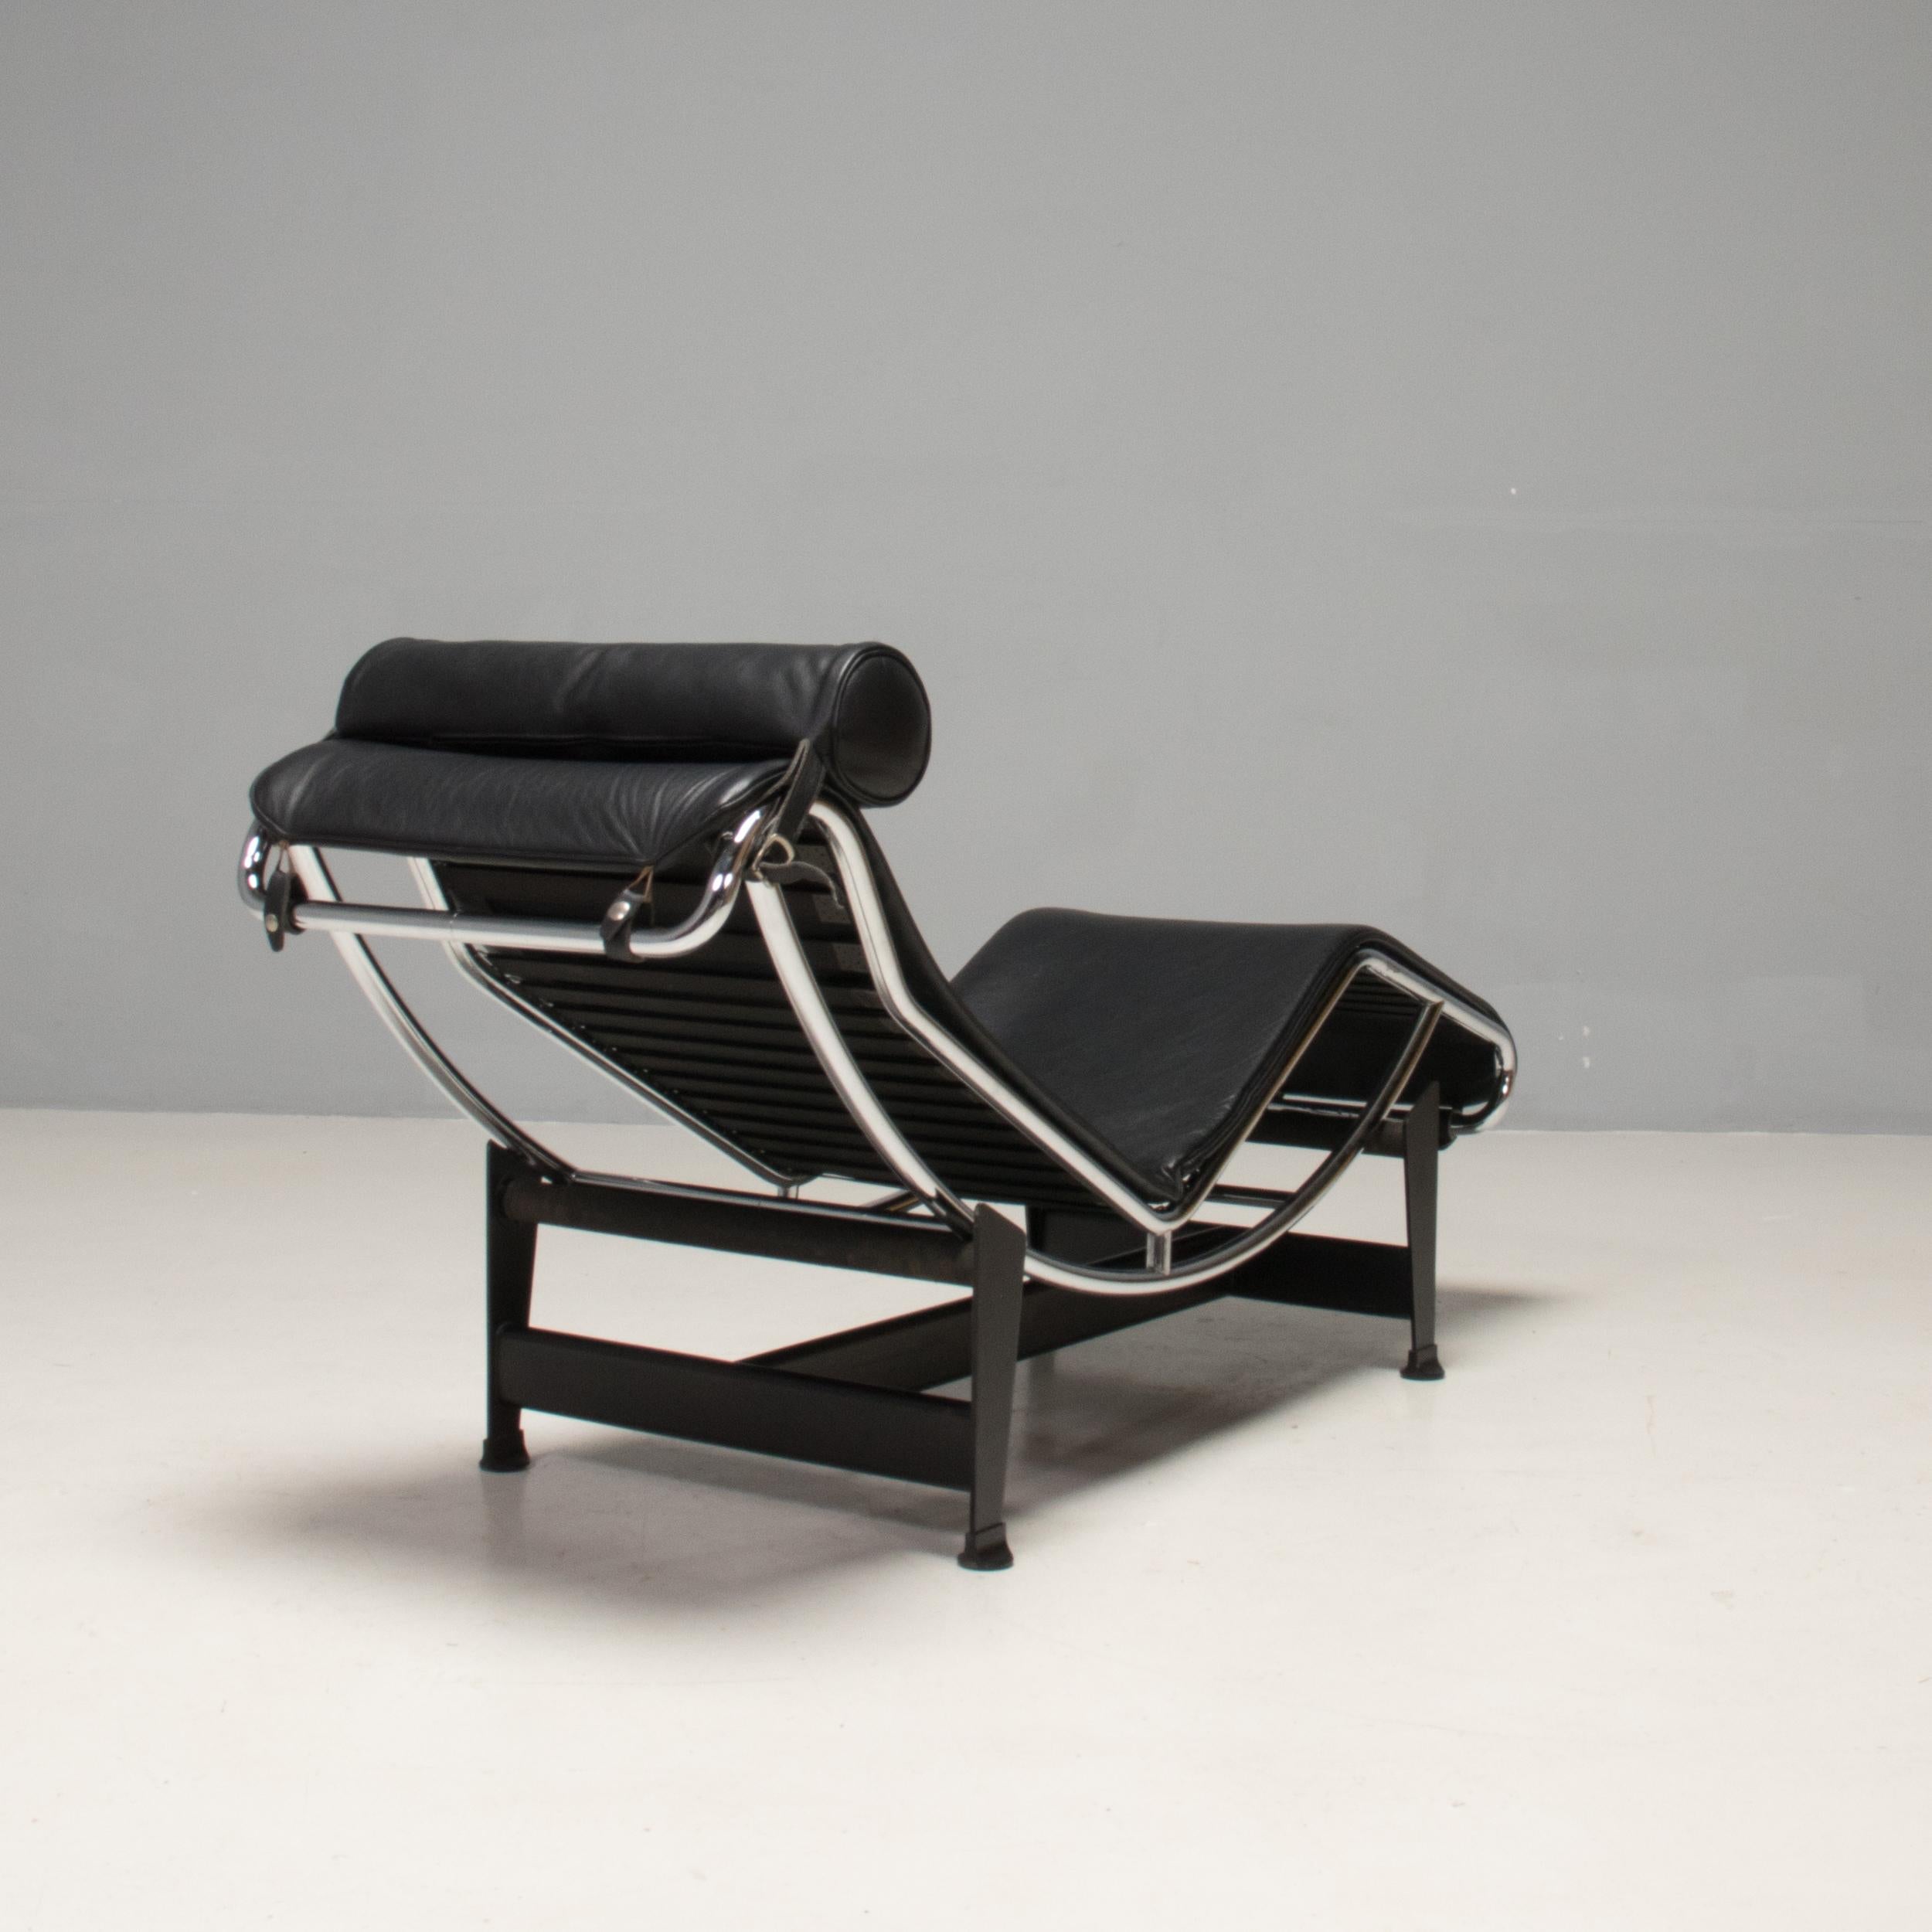 Cassina Le Corbusier, Pierre Jeanneret & Charlotte Perriand LC4 Chaise Lounge 1